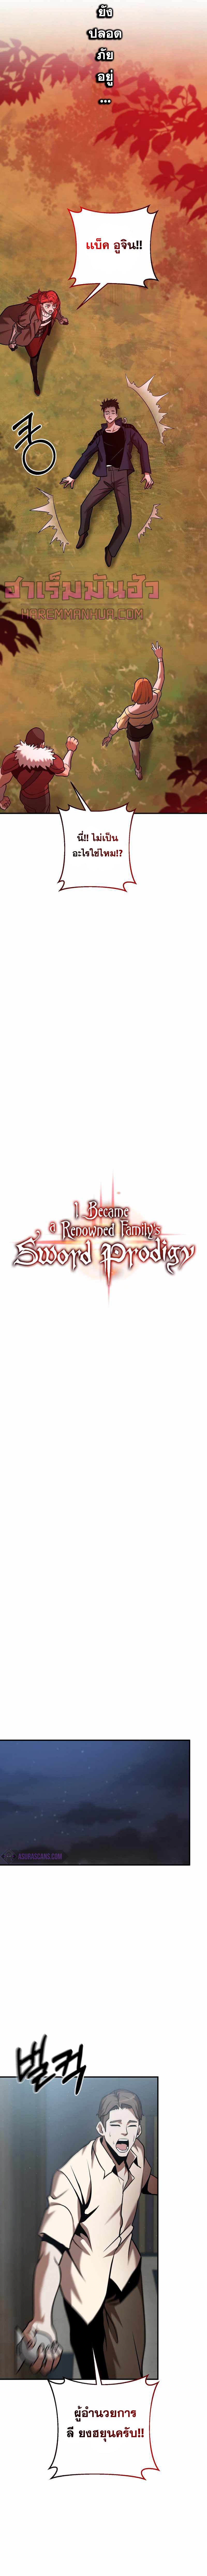 I Became a Renowned Familyâ€™s Sword Prodigy 23 05